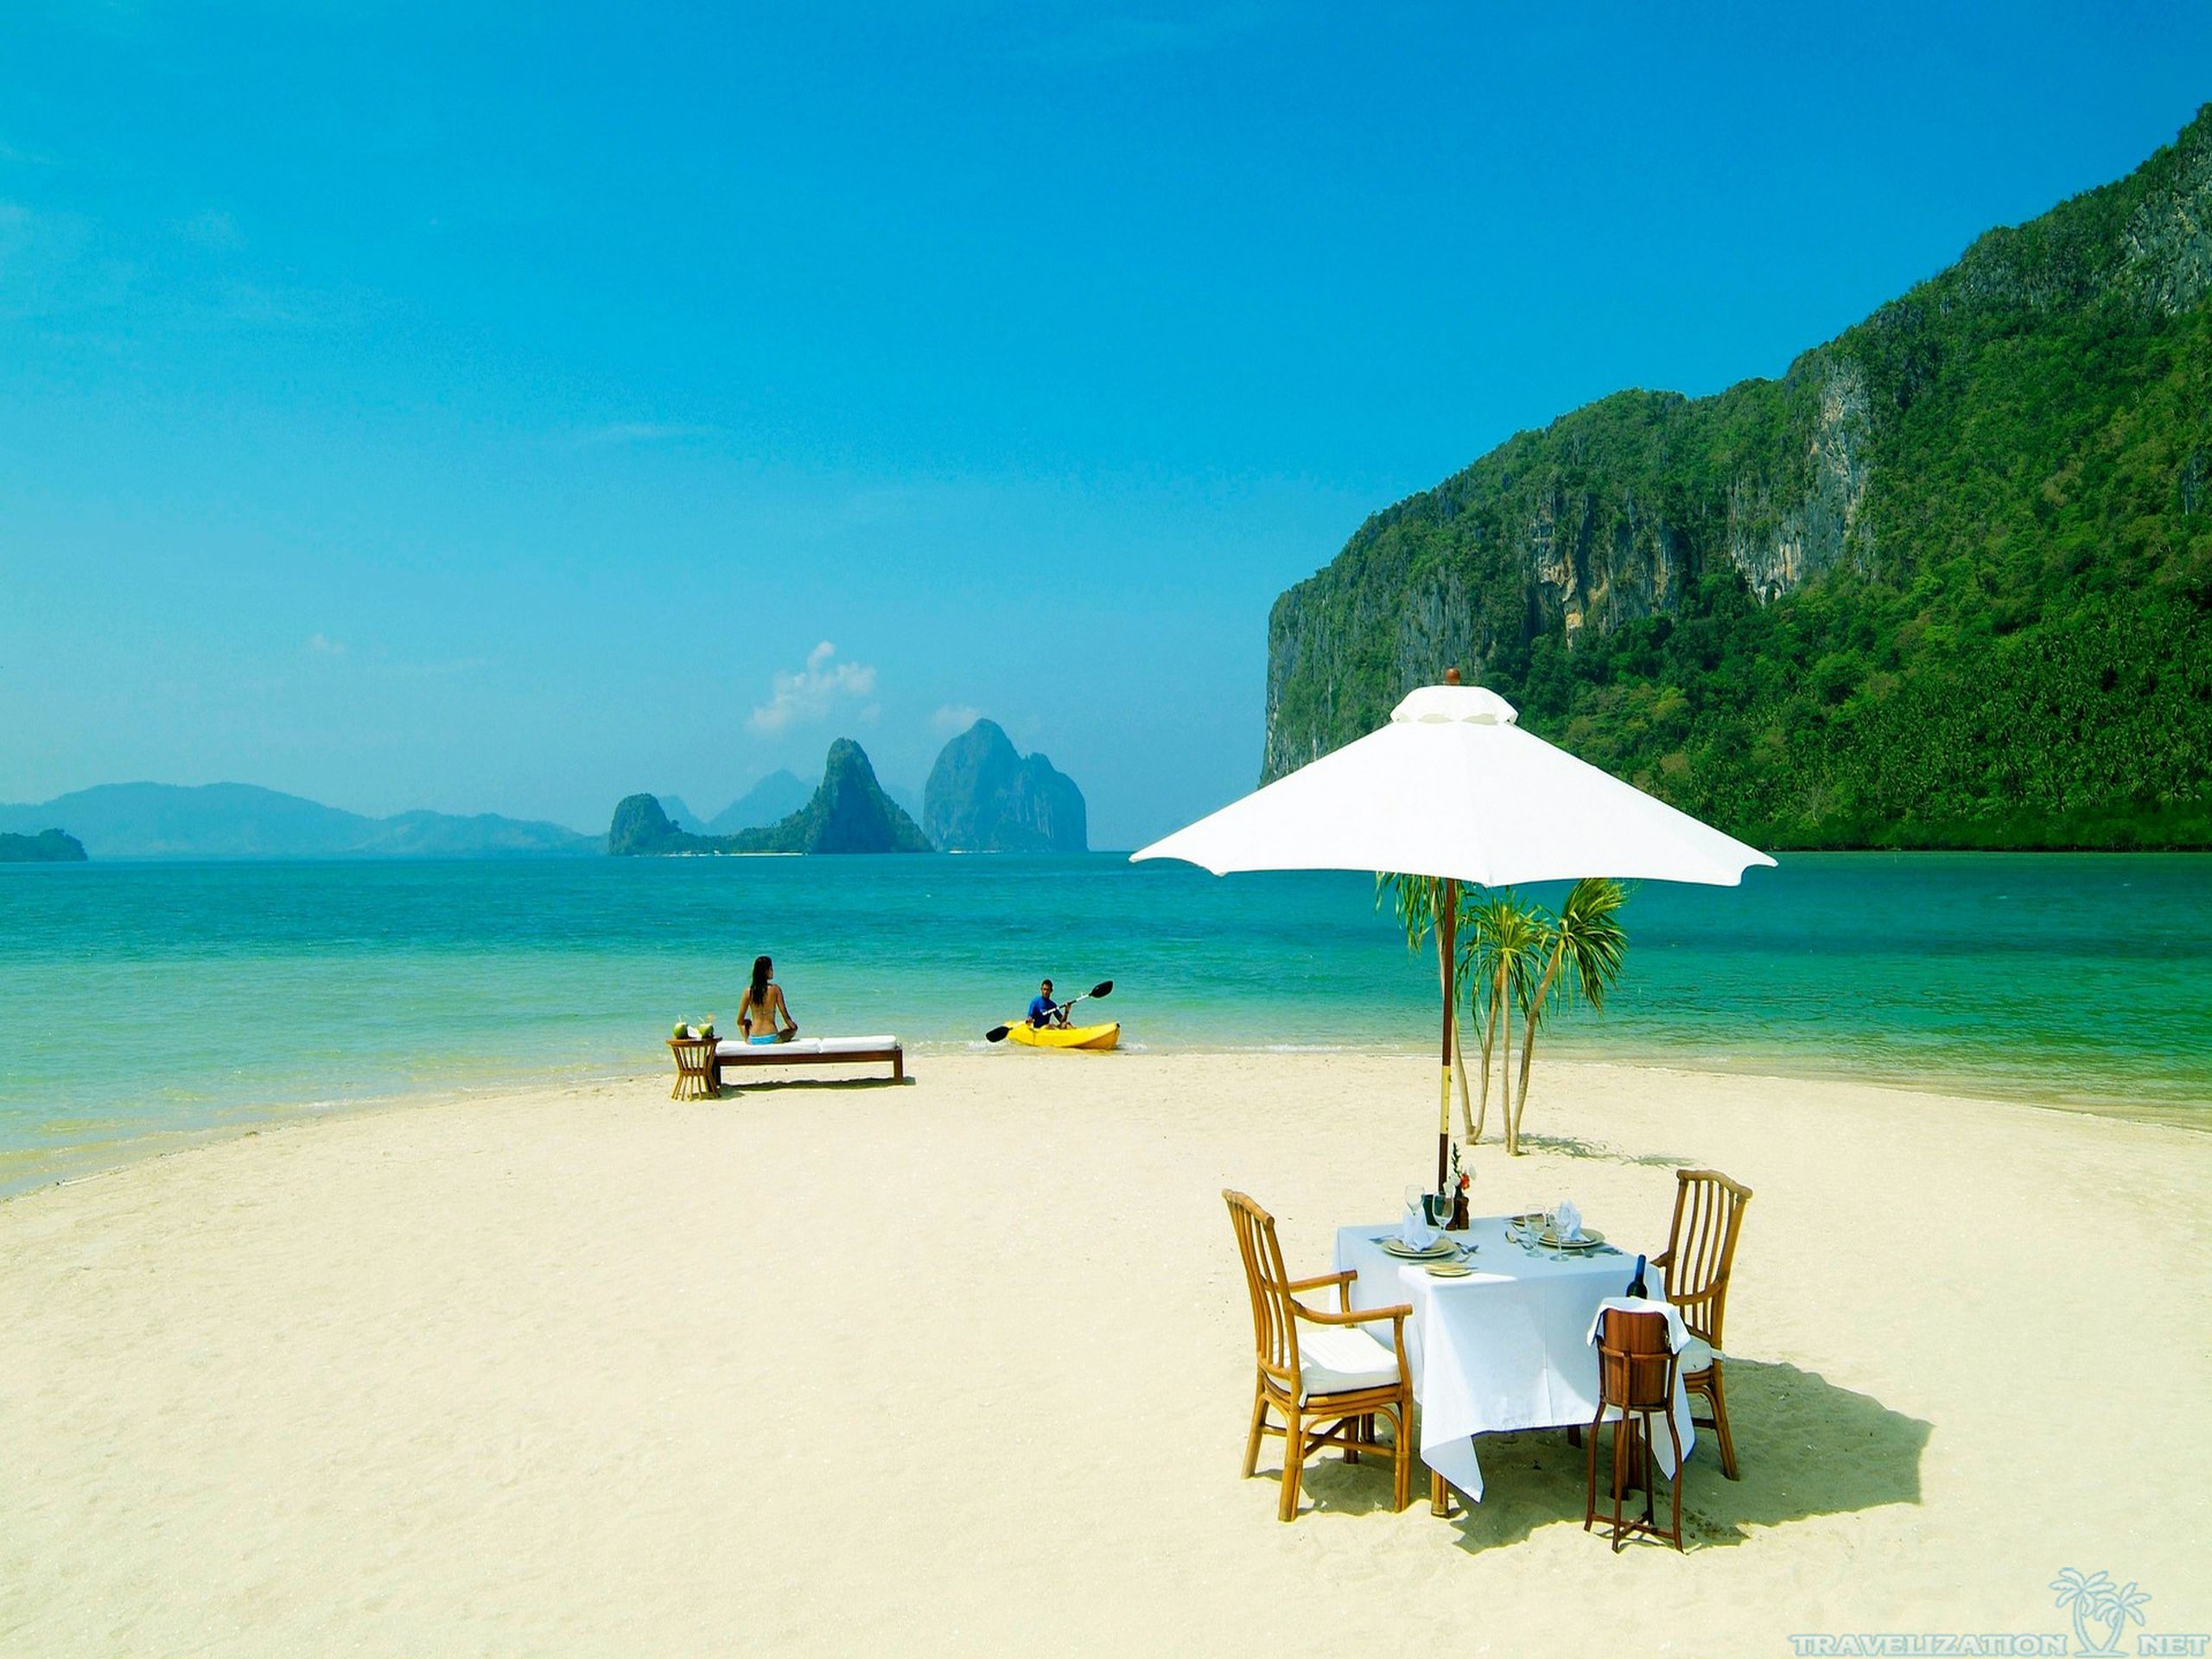 Most Exotic and Relaxing Beach Wallpapers Travelization